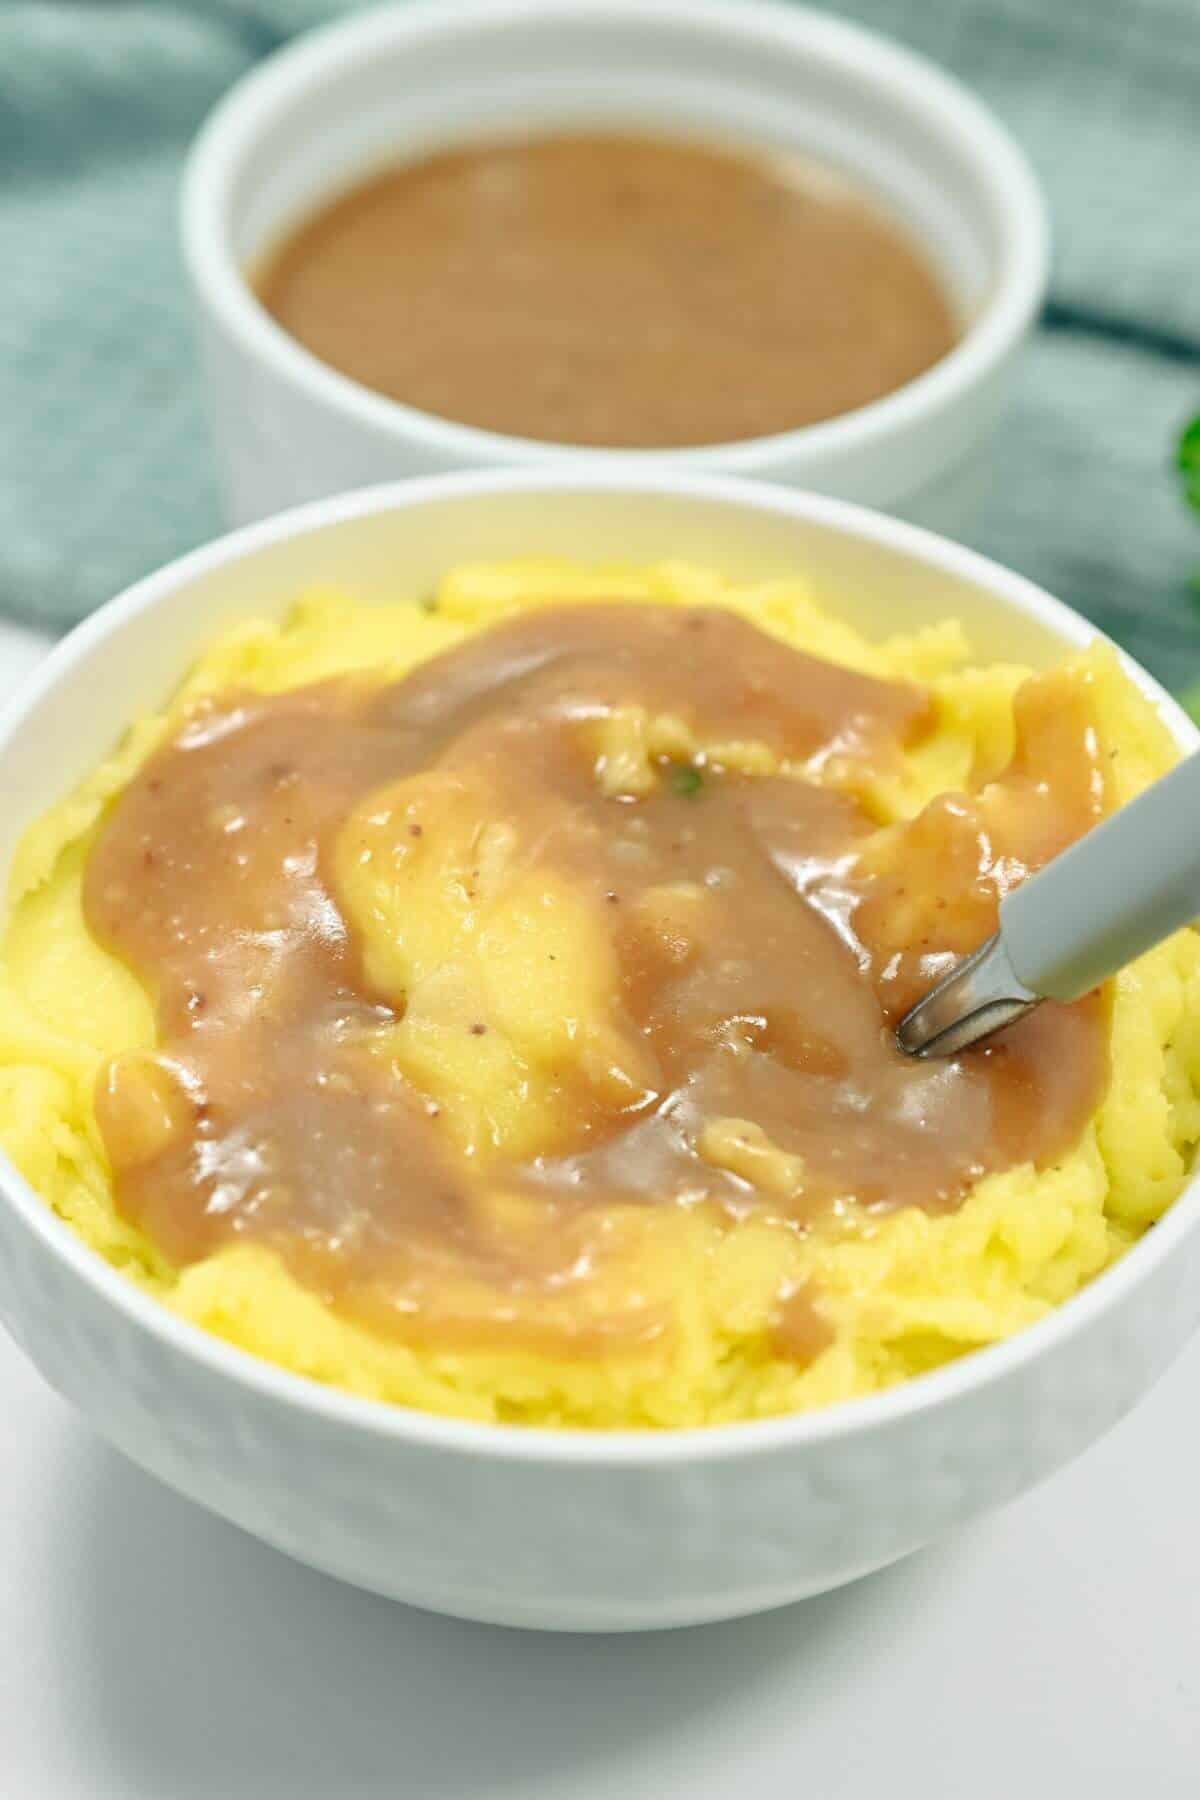 Gravy poured over mashed potatoes.